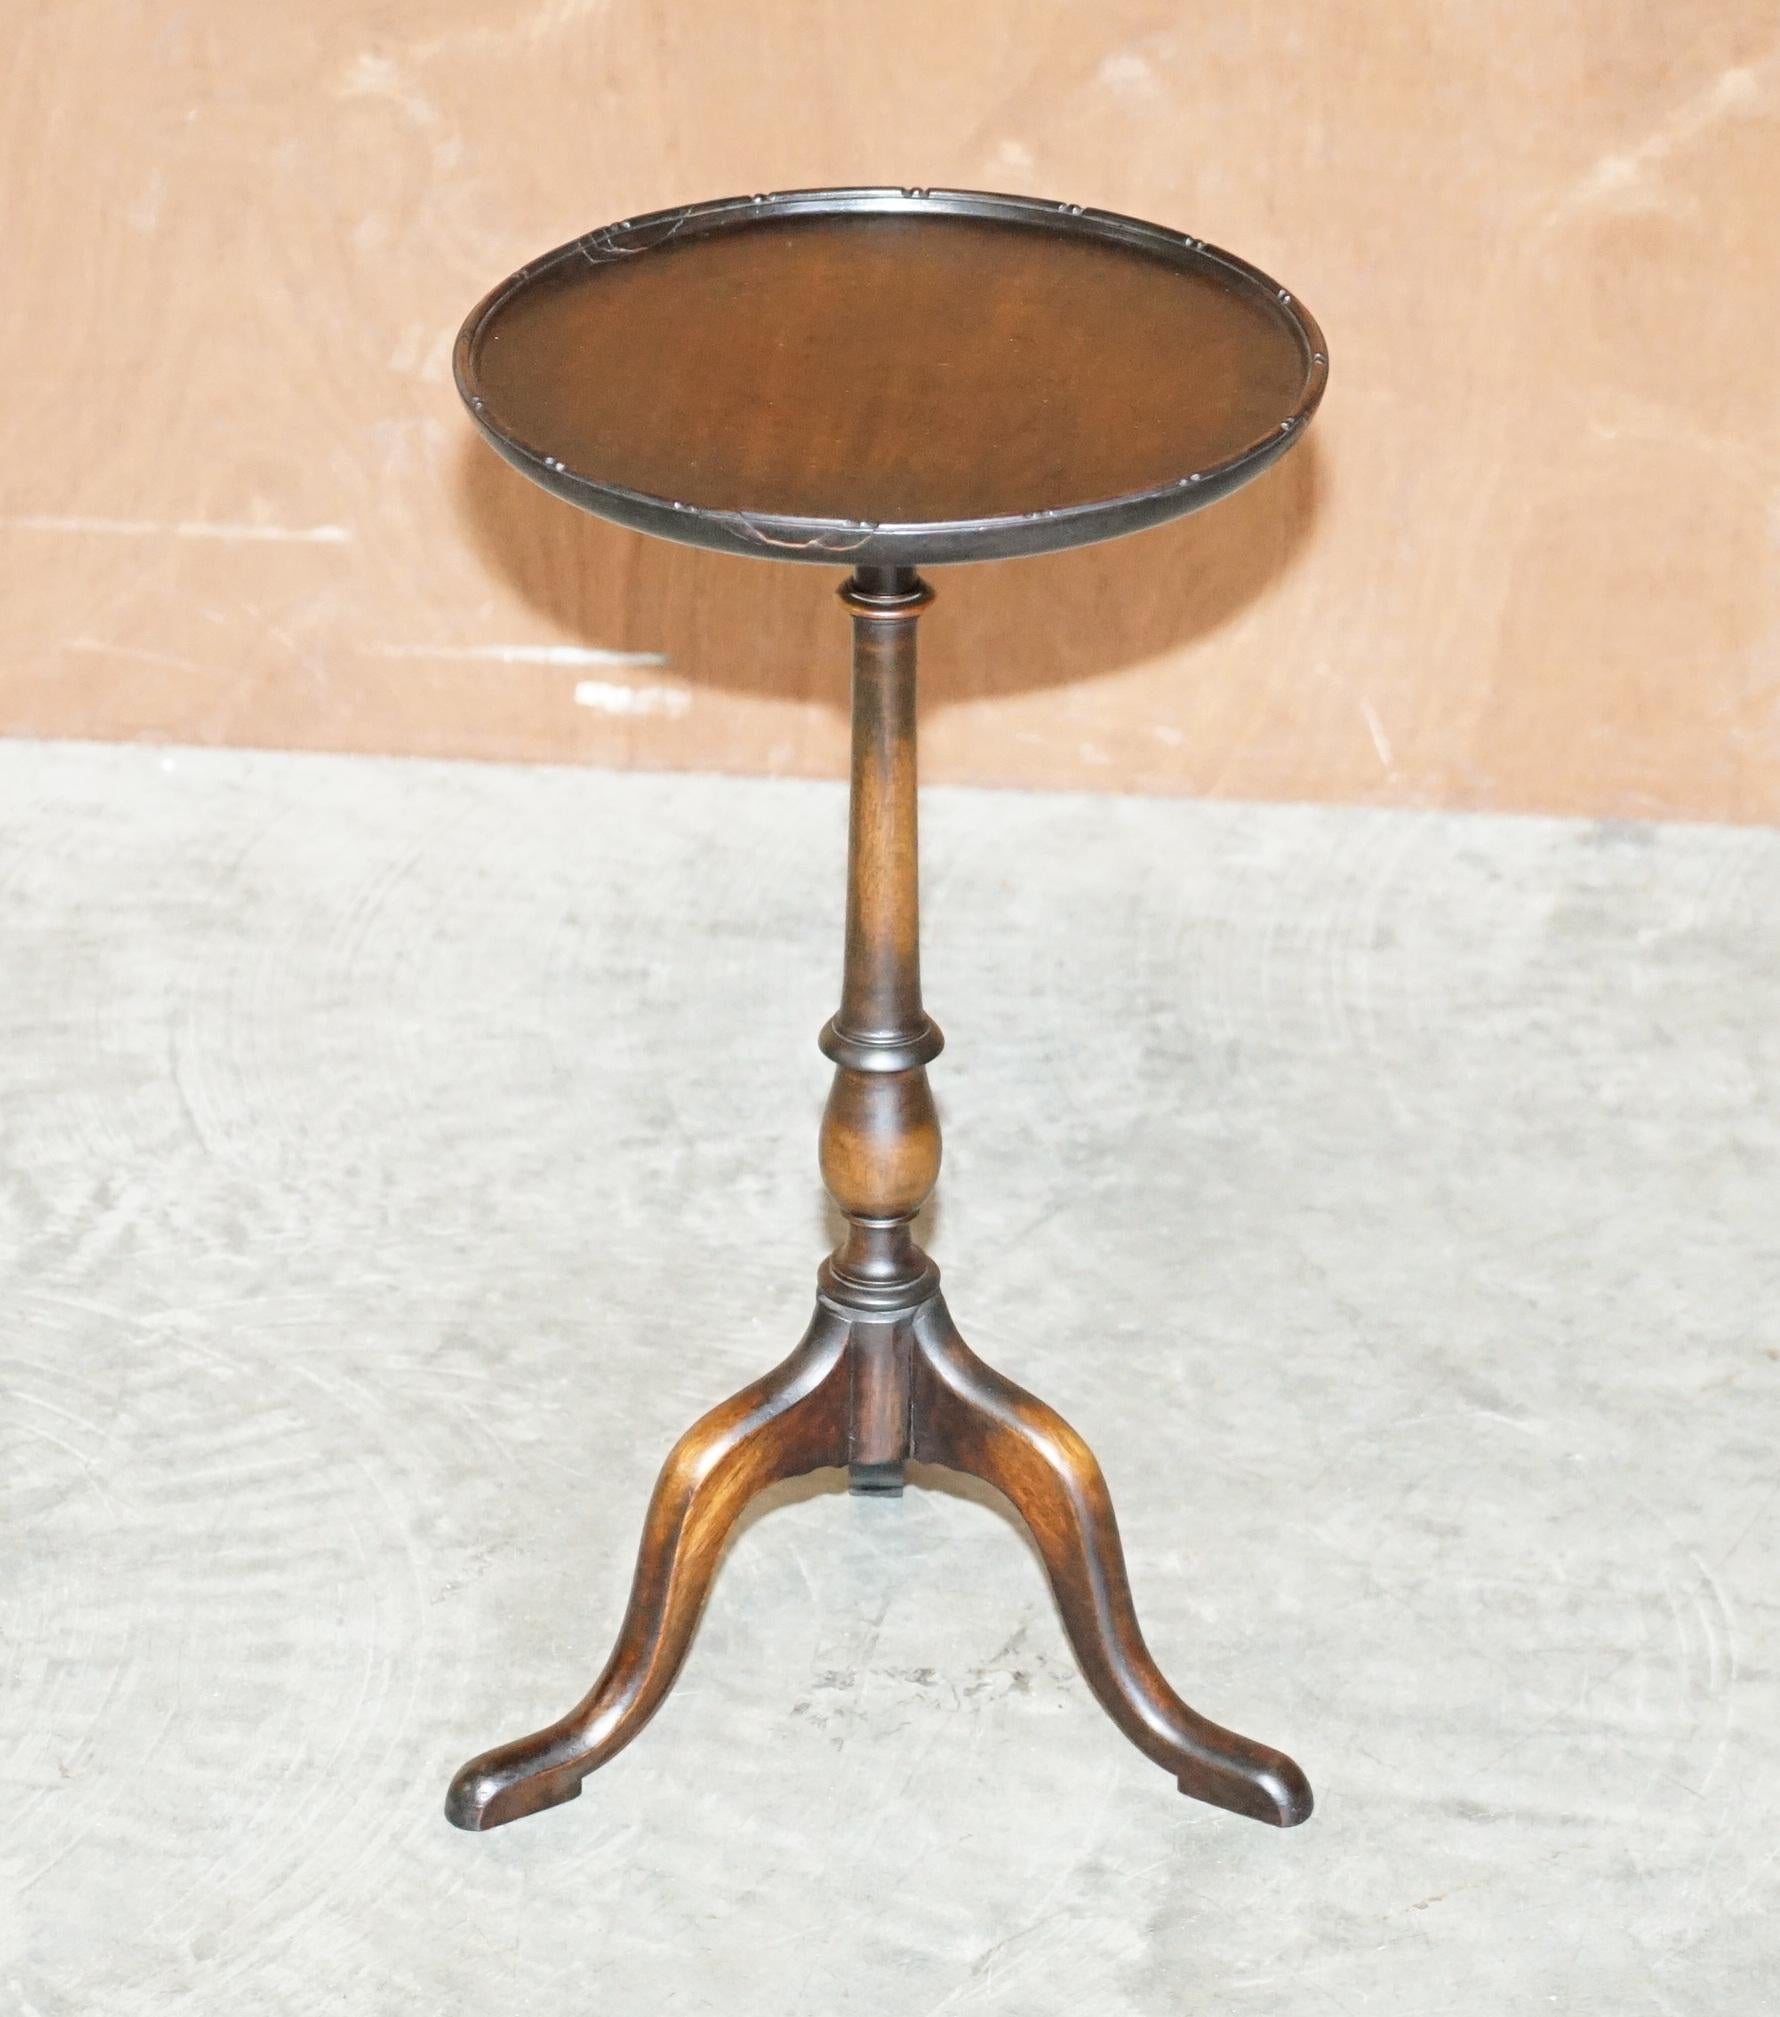 We are delighted to offer for sale this lovely vintage Scottish Mahogany lamp or side table with nicely turned column base and carved top edge.

A good-looking well-made tripod table in good condition throughout, we have cleaned waxed and polished